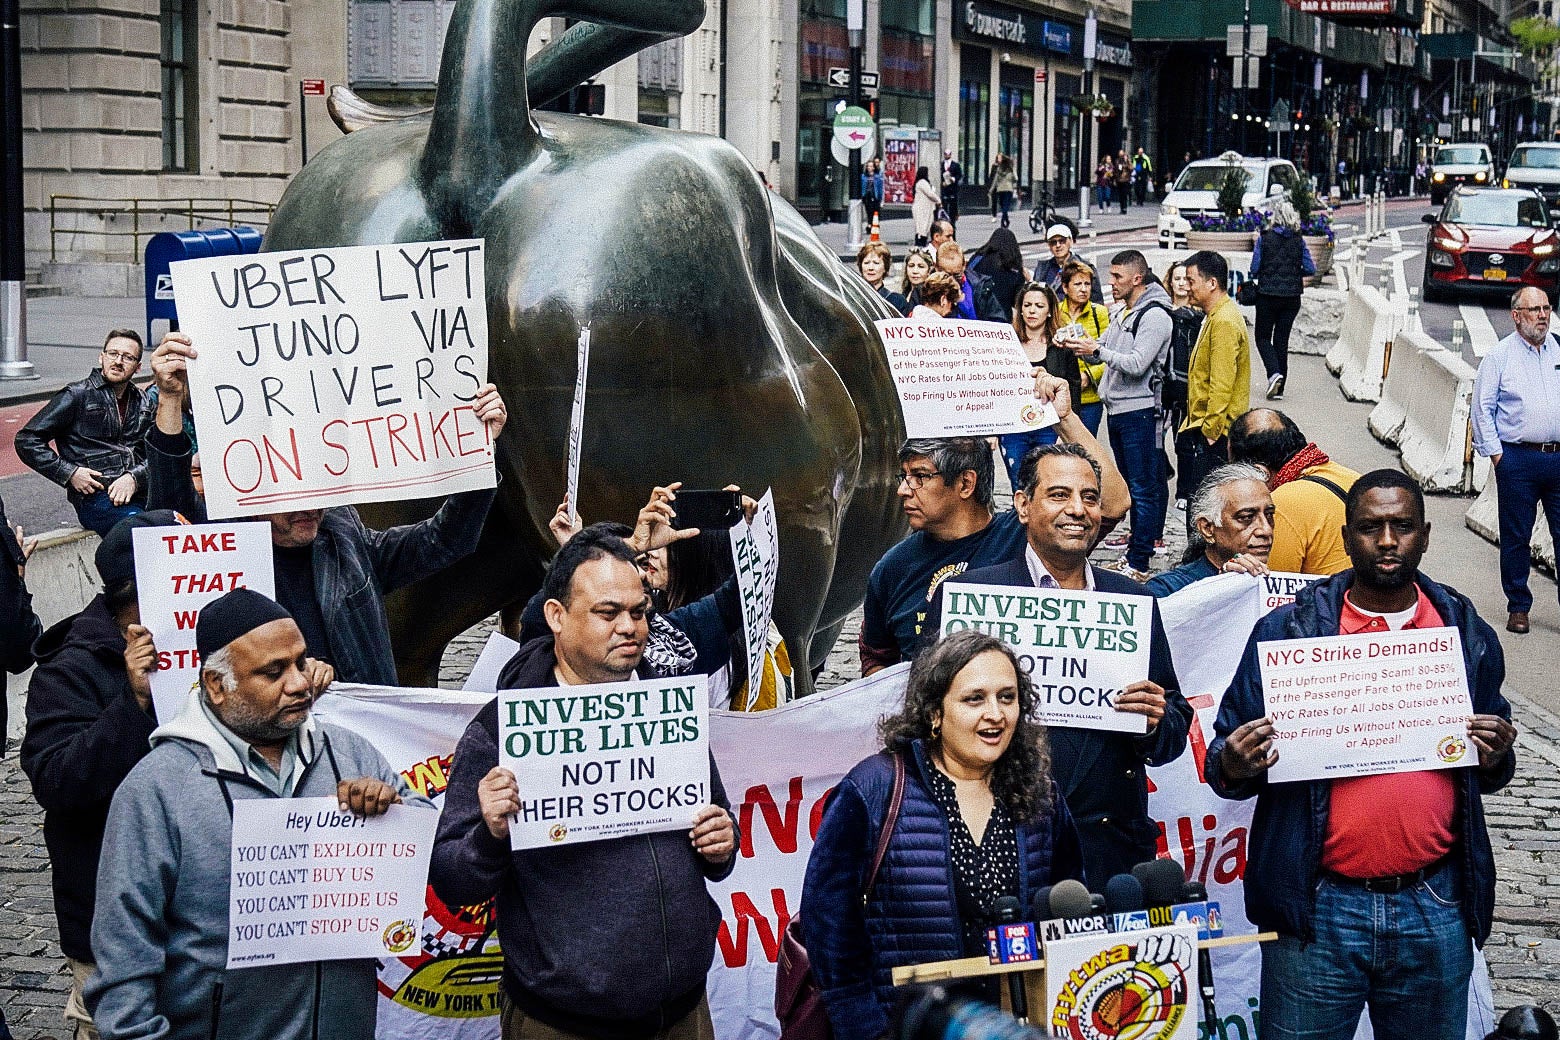 Next to the Charging Bull, protesters hold signs with slogans such as "INVEST IN OUR LIVES NOT IN THEIR STOCKS," "UBER LYFT JUNO VIA DRIVERS ON STRIKE," and "YOU CAN'T EXPLOIT US."